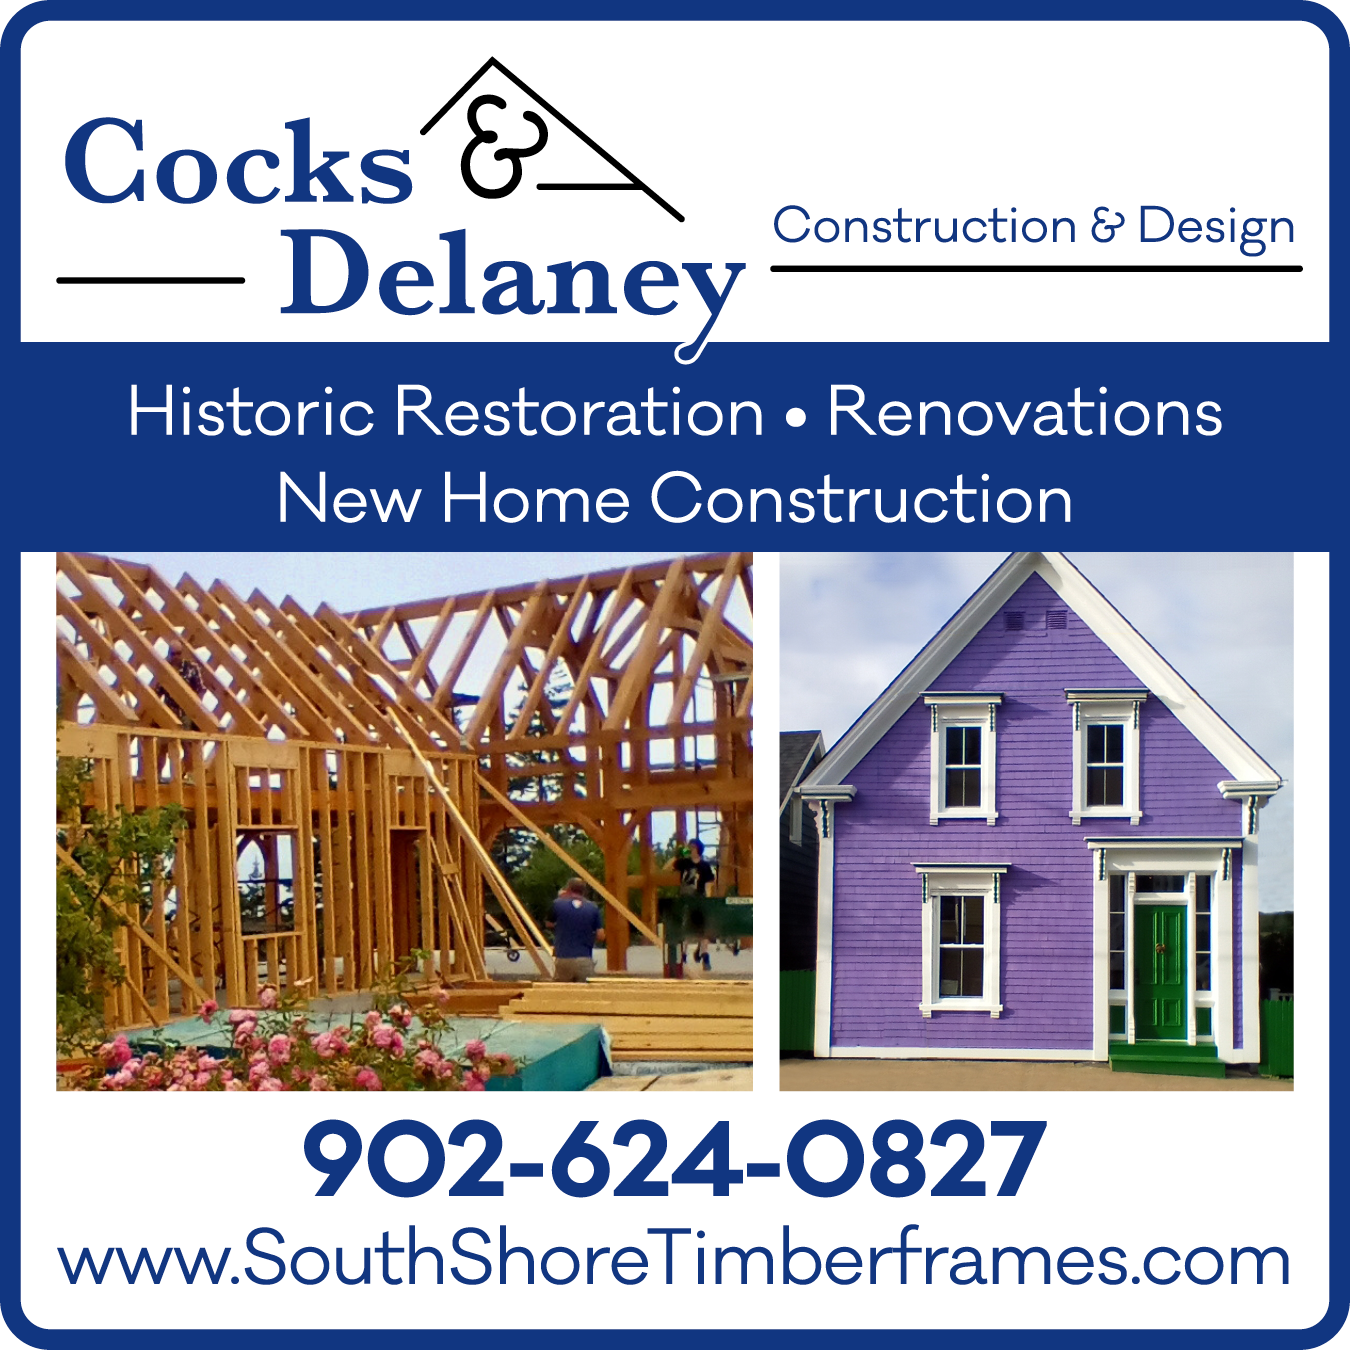 Cocks and Delaney Construction and Design